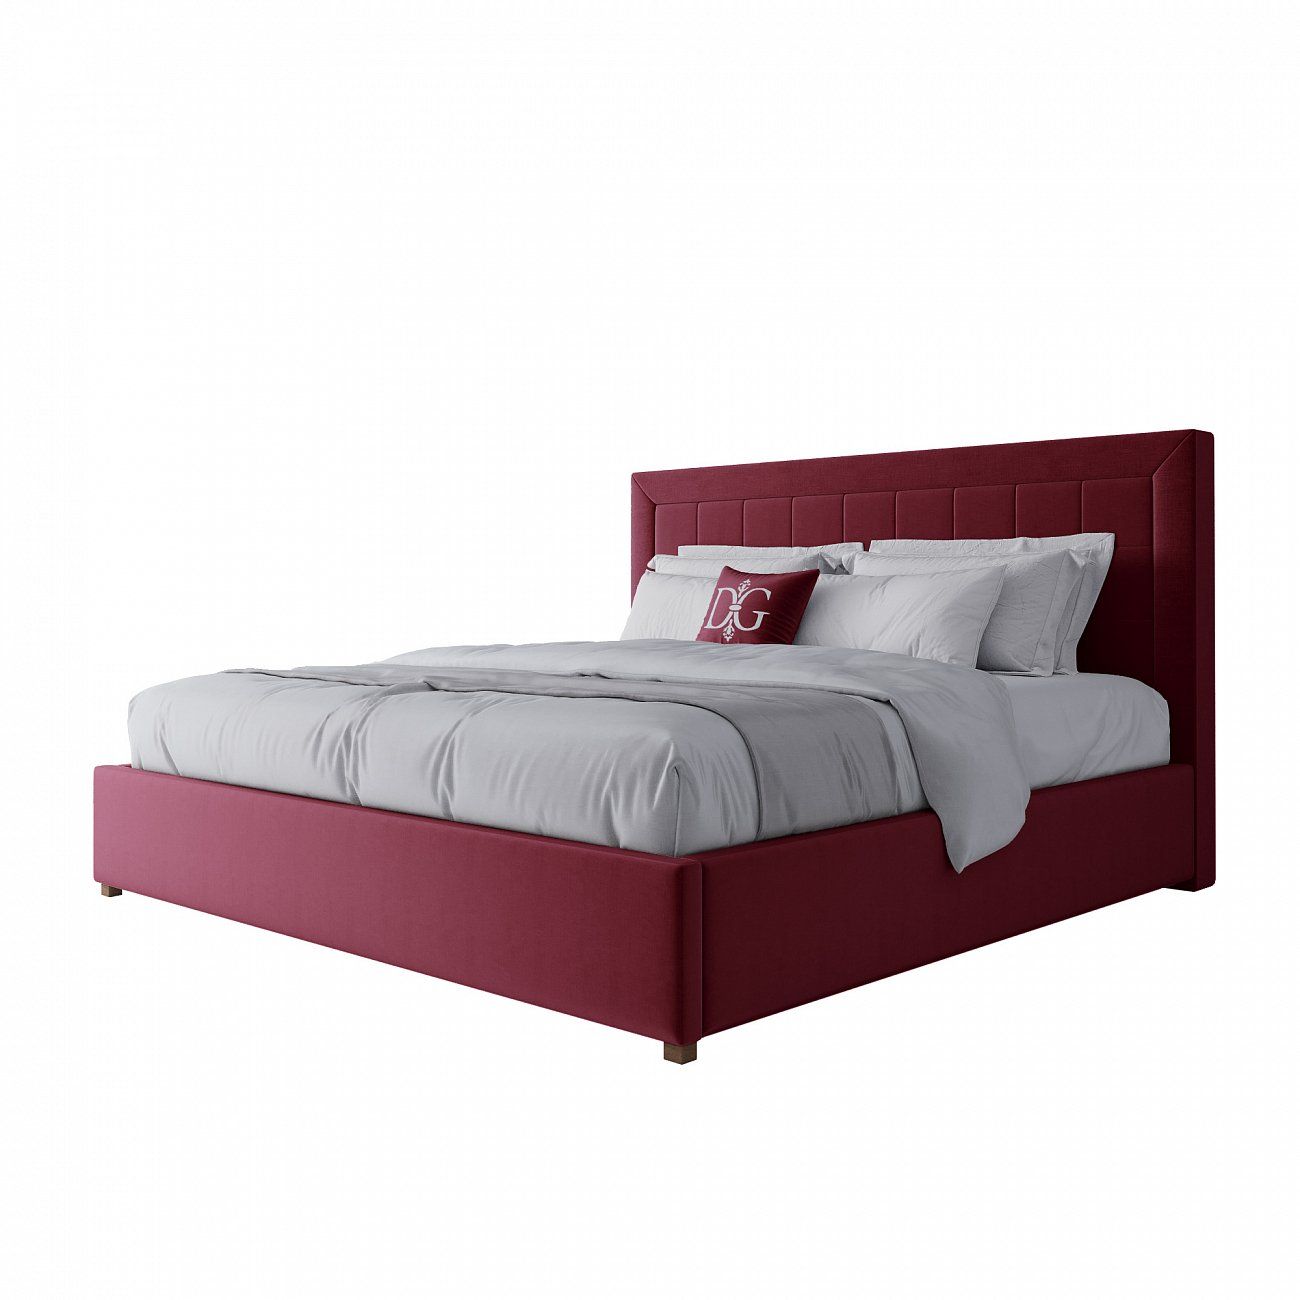 Double bed 180x200 cm red Elizabeth